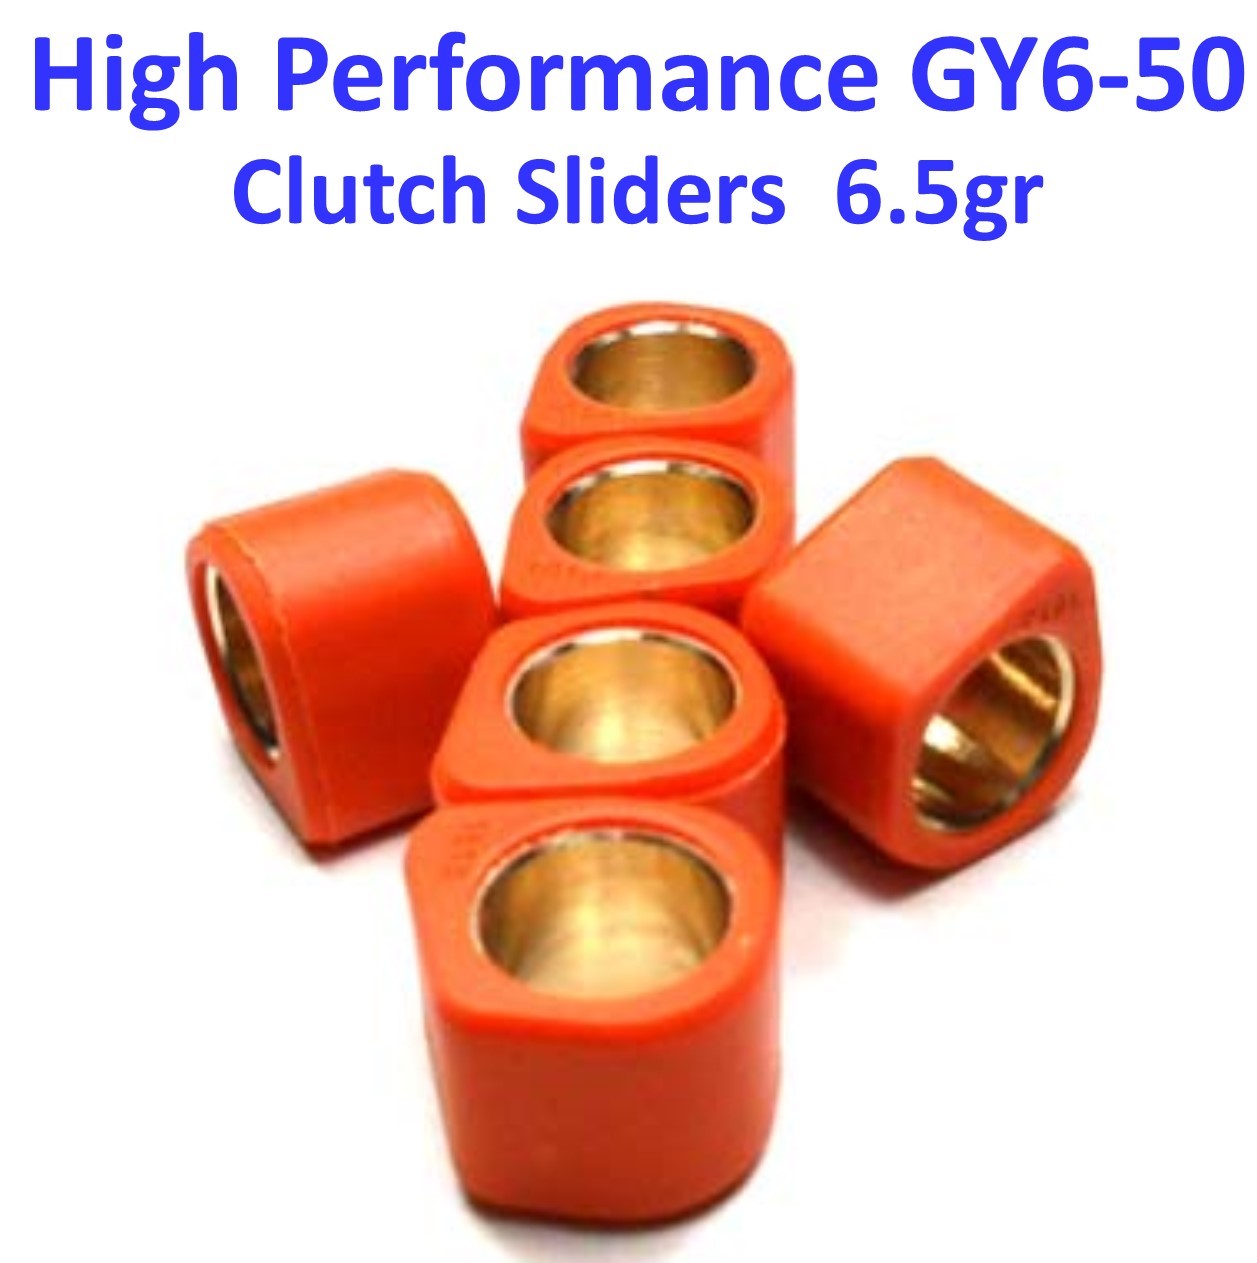 16X13 (6.5g) High Performance Clutch Sliders Set for GY6-49, 50, 70, 80cc 4 Stroke Scooter Engines